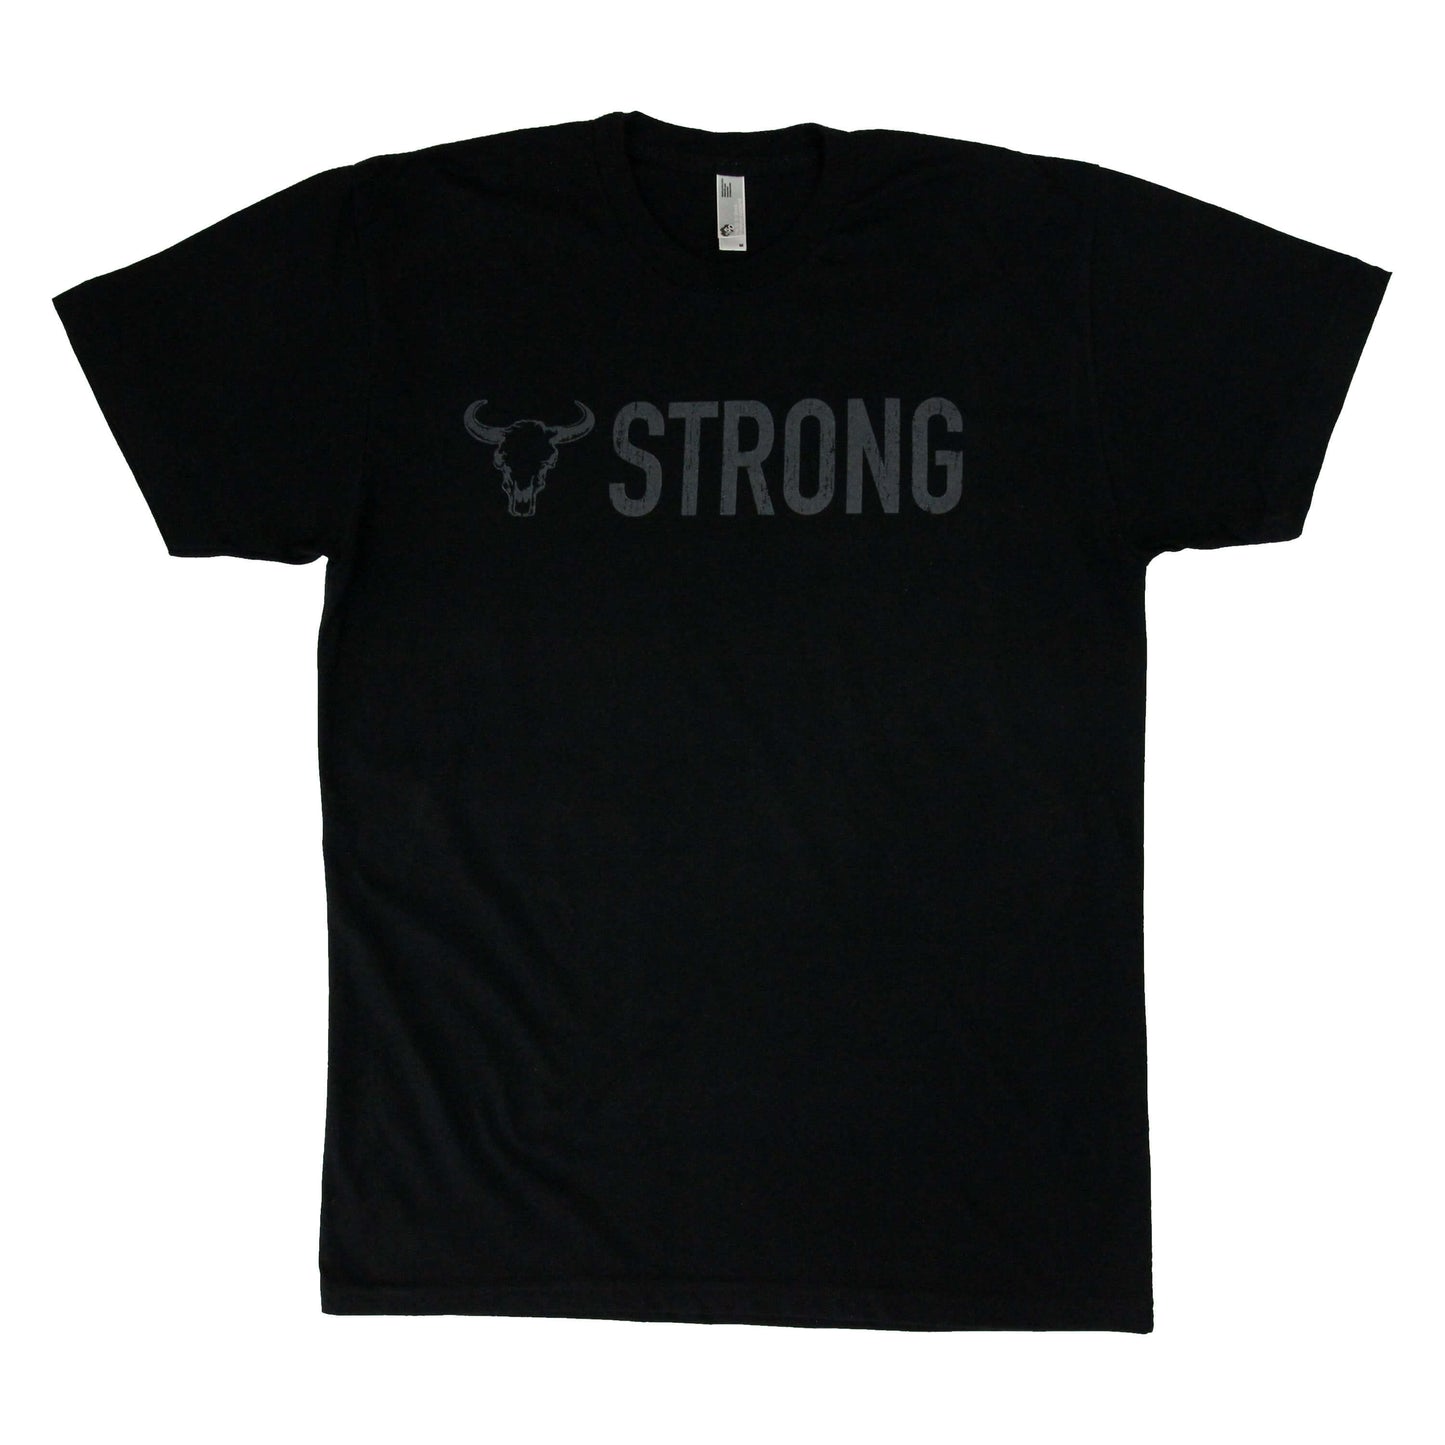 The 'Bull Strong' powerlifting t-shirt | Iron Strong Apparel